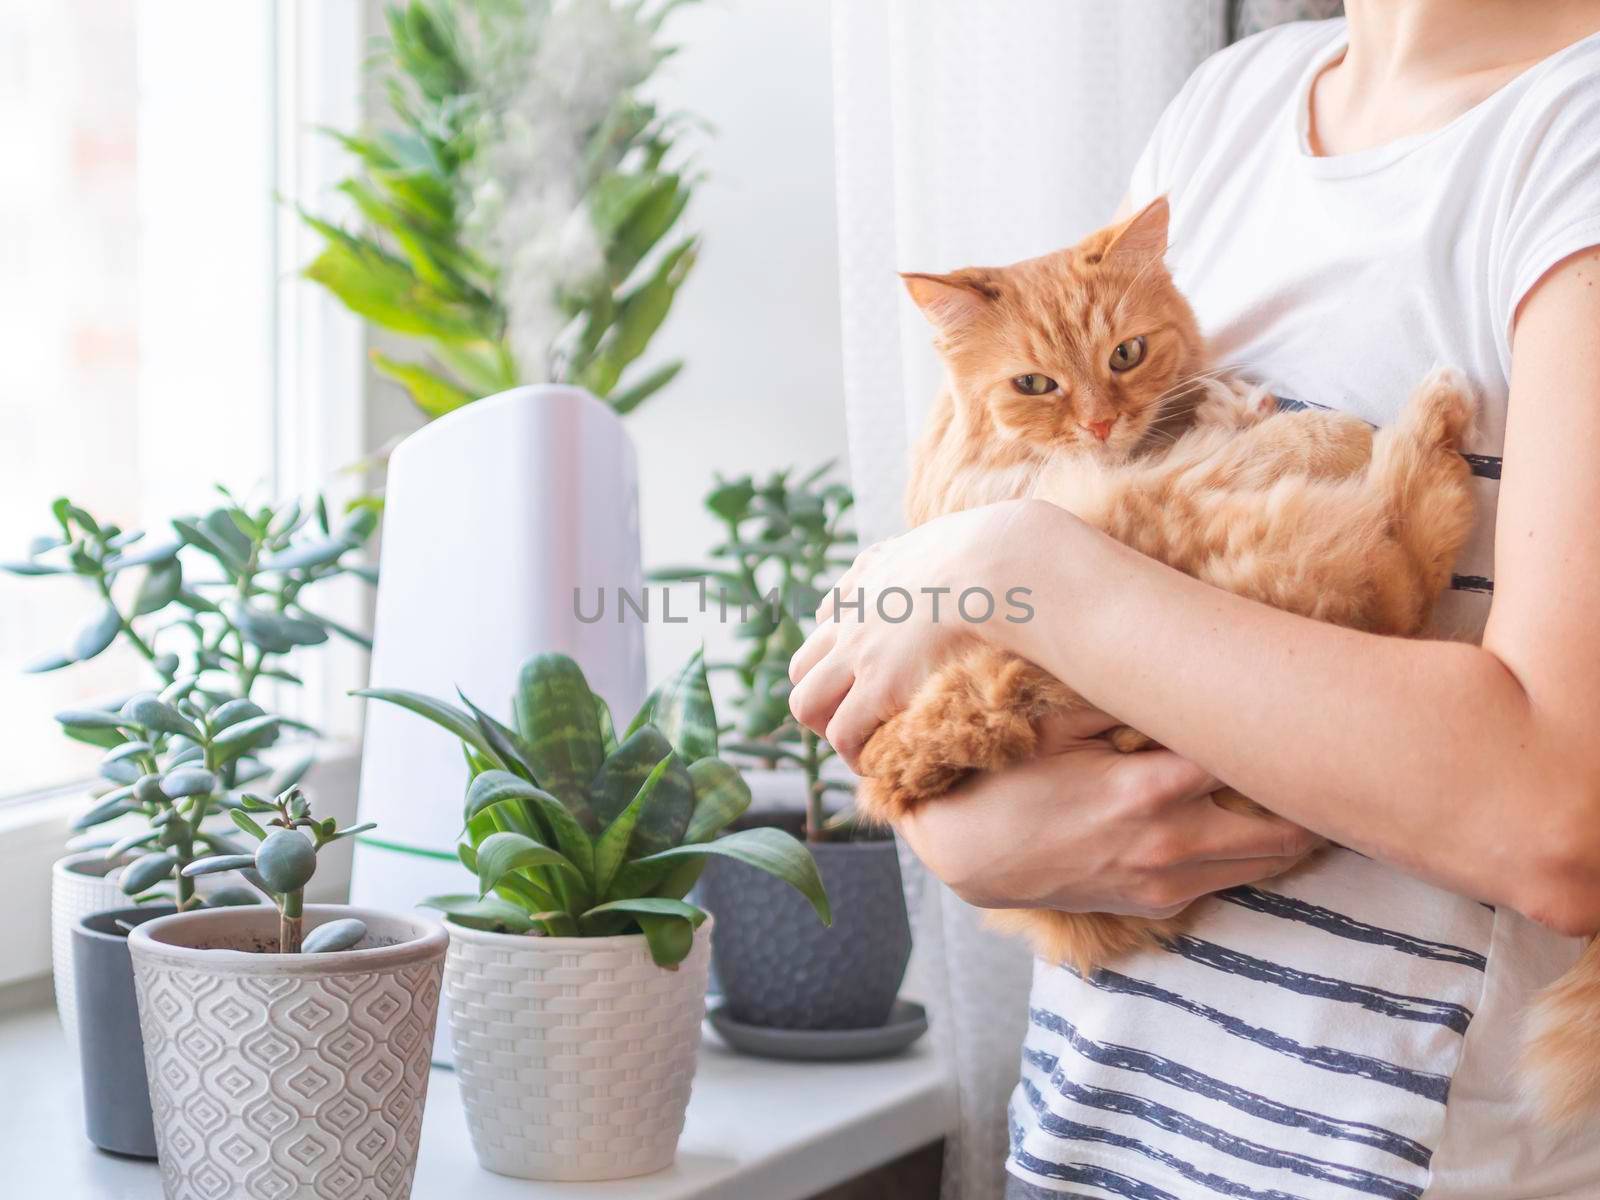 Woman strokes cute ginger cat. Ultrasonic humidifier among houseplants. Flower pots with succulent plants on windowsill. Water steam moisturizes dry air at home. Electric device and fluffy pet.